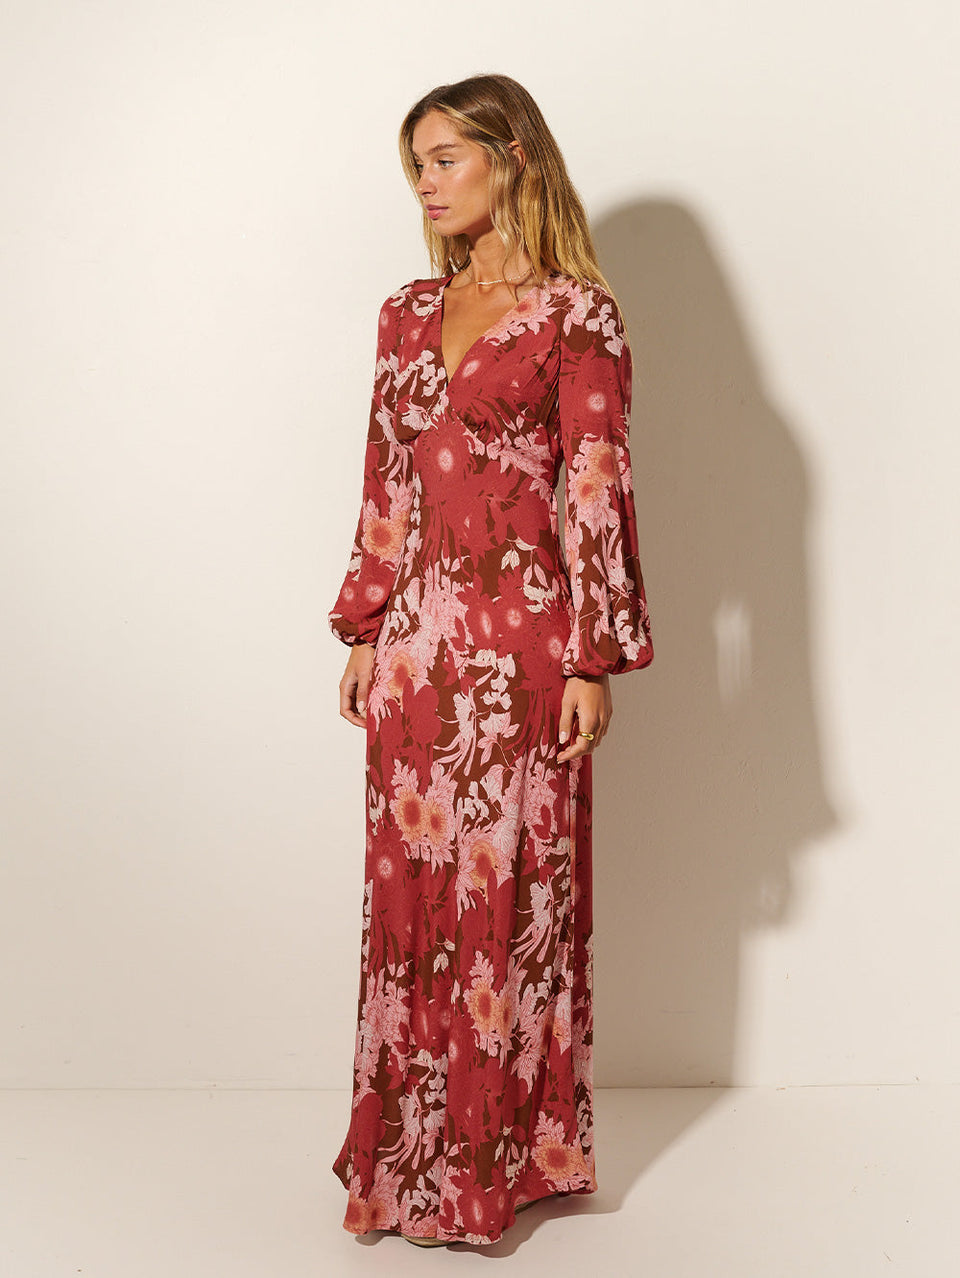 Studio model wears KIVARI Hacienda Tie Back Maxi Dress: A red, pink and brown floral dress crafted from sustainable LENZING Viscose Crepe in a bias cut with underbust seams, long sleeves and cut-out back with keyhole ties.